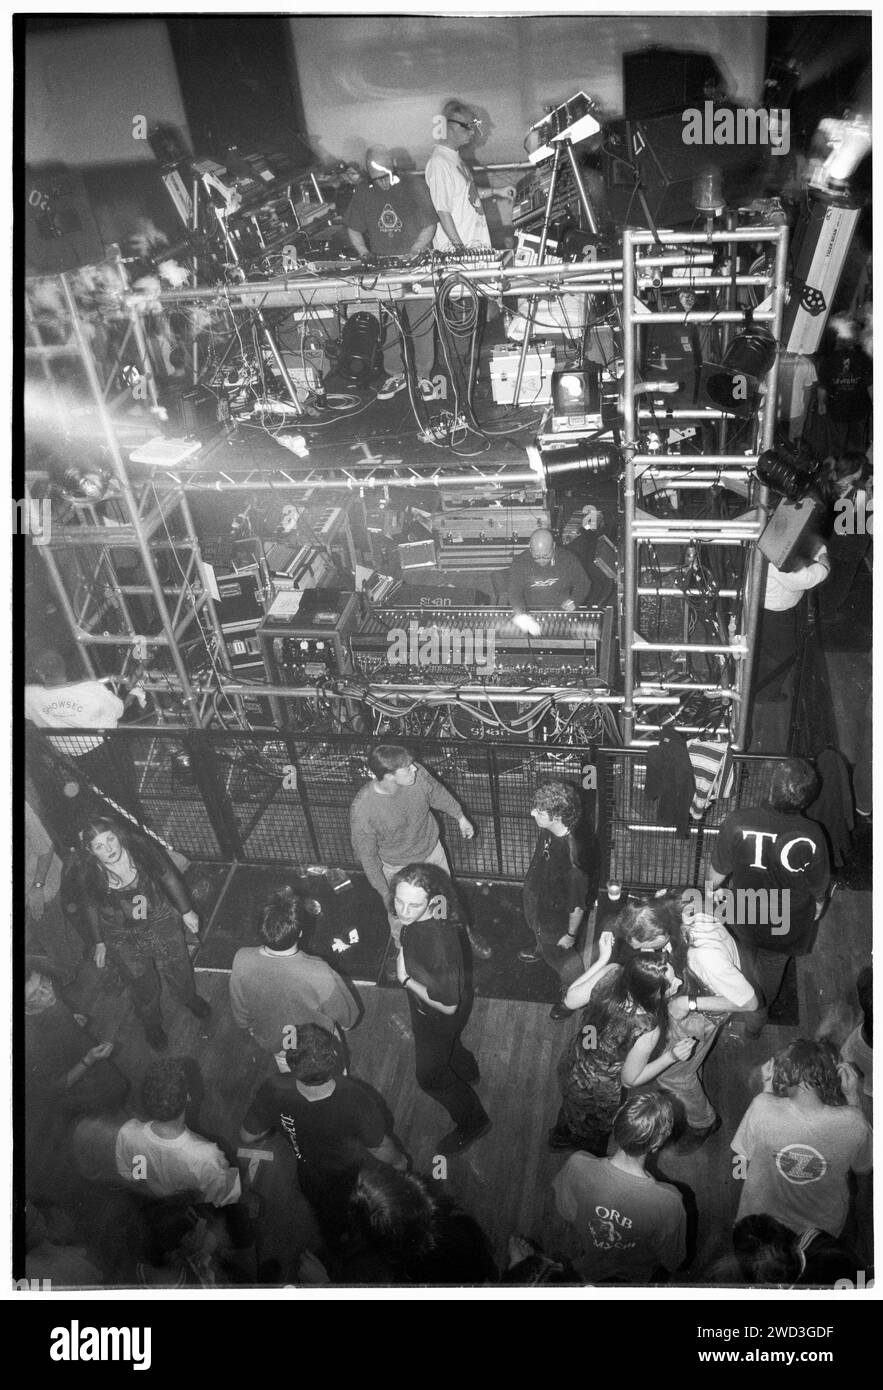 Dance music legends Orbital on their scaffold centre stage with light glasses  on the Megadog Tour at Cardiff University in Cardiff, Wales, UK on 4 October, 1993. Photo: Rob Watkins. INFO: Orbital, a pioneering electronic music duo from England formed in 1989, played a crucial role in the development of ambient and techno genres. Brothers Paul and Phil Hartnoll created innovative, atmospheric, and danceable tracks that have left a lasting impact on electronic music. Stock Photo